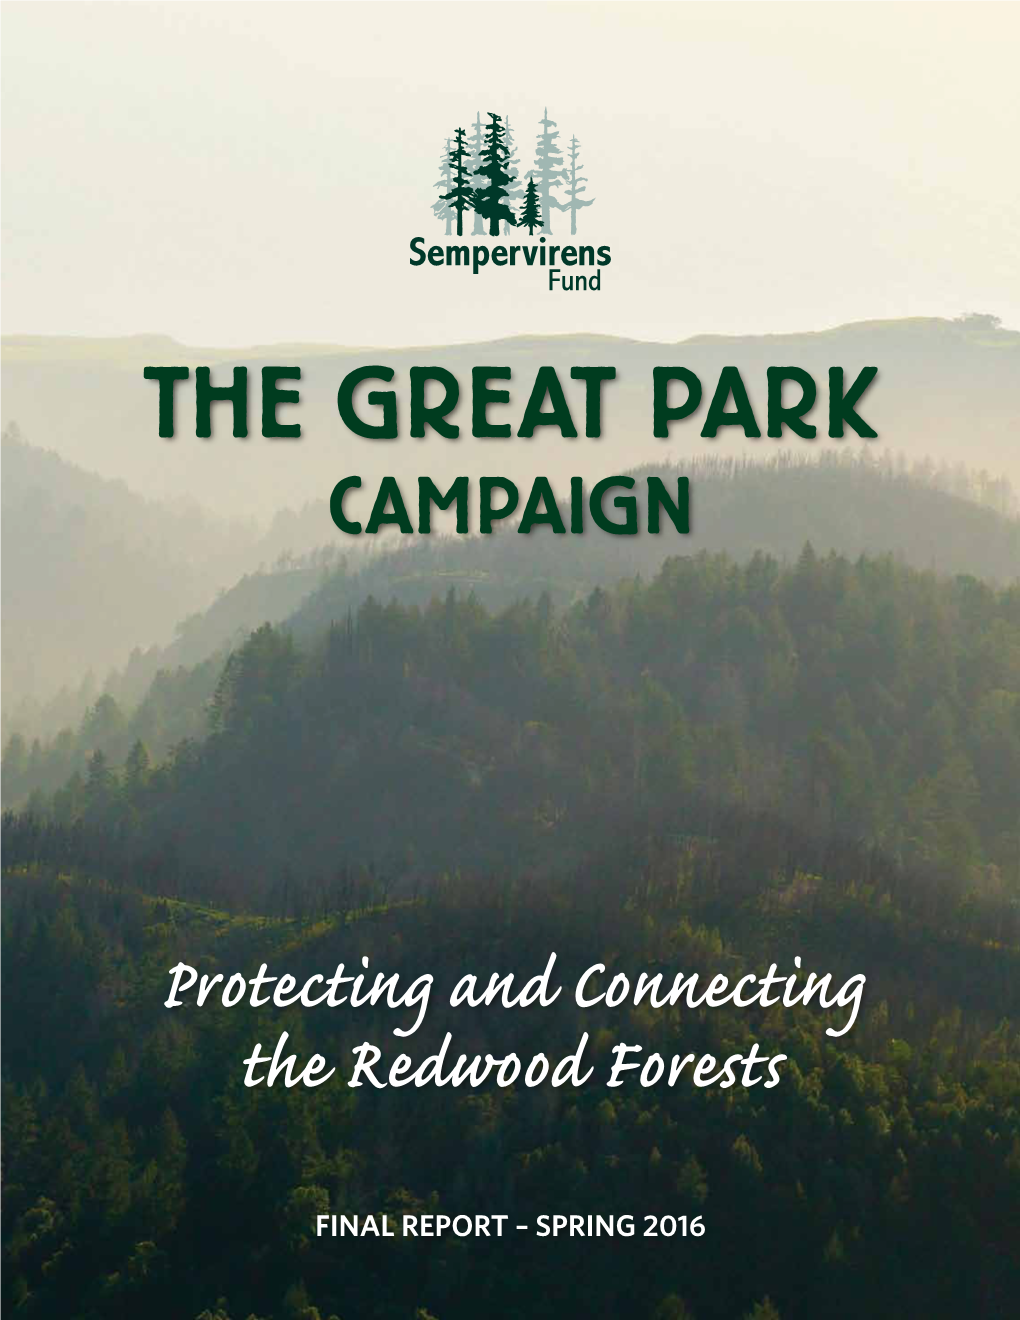 The Great Park Campaign